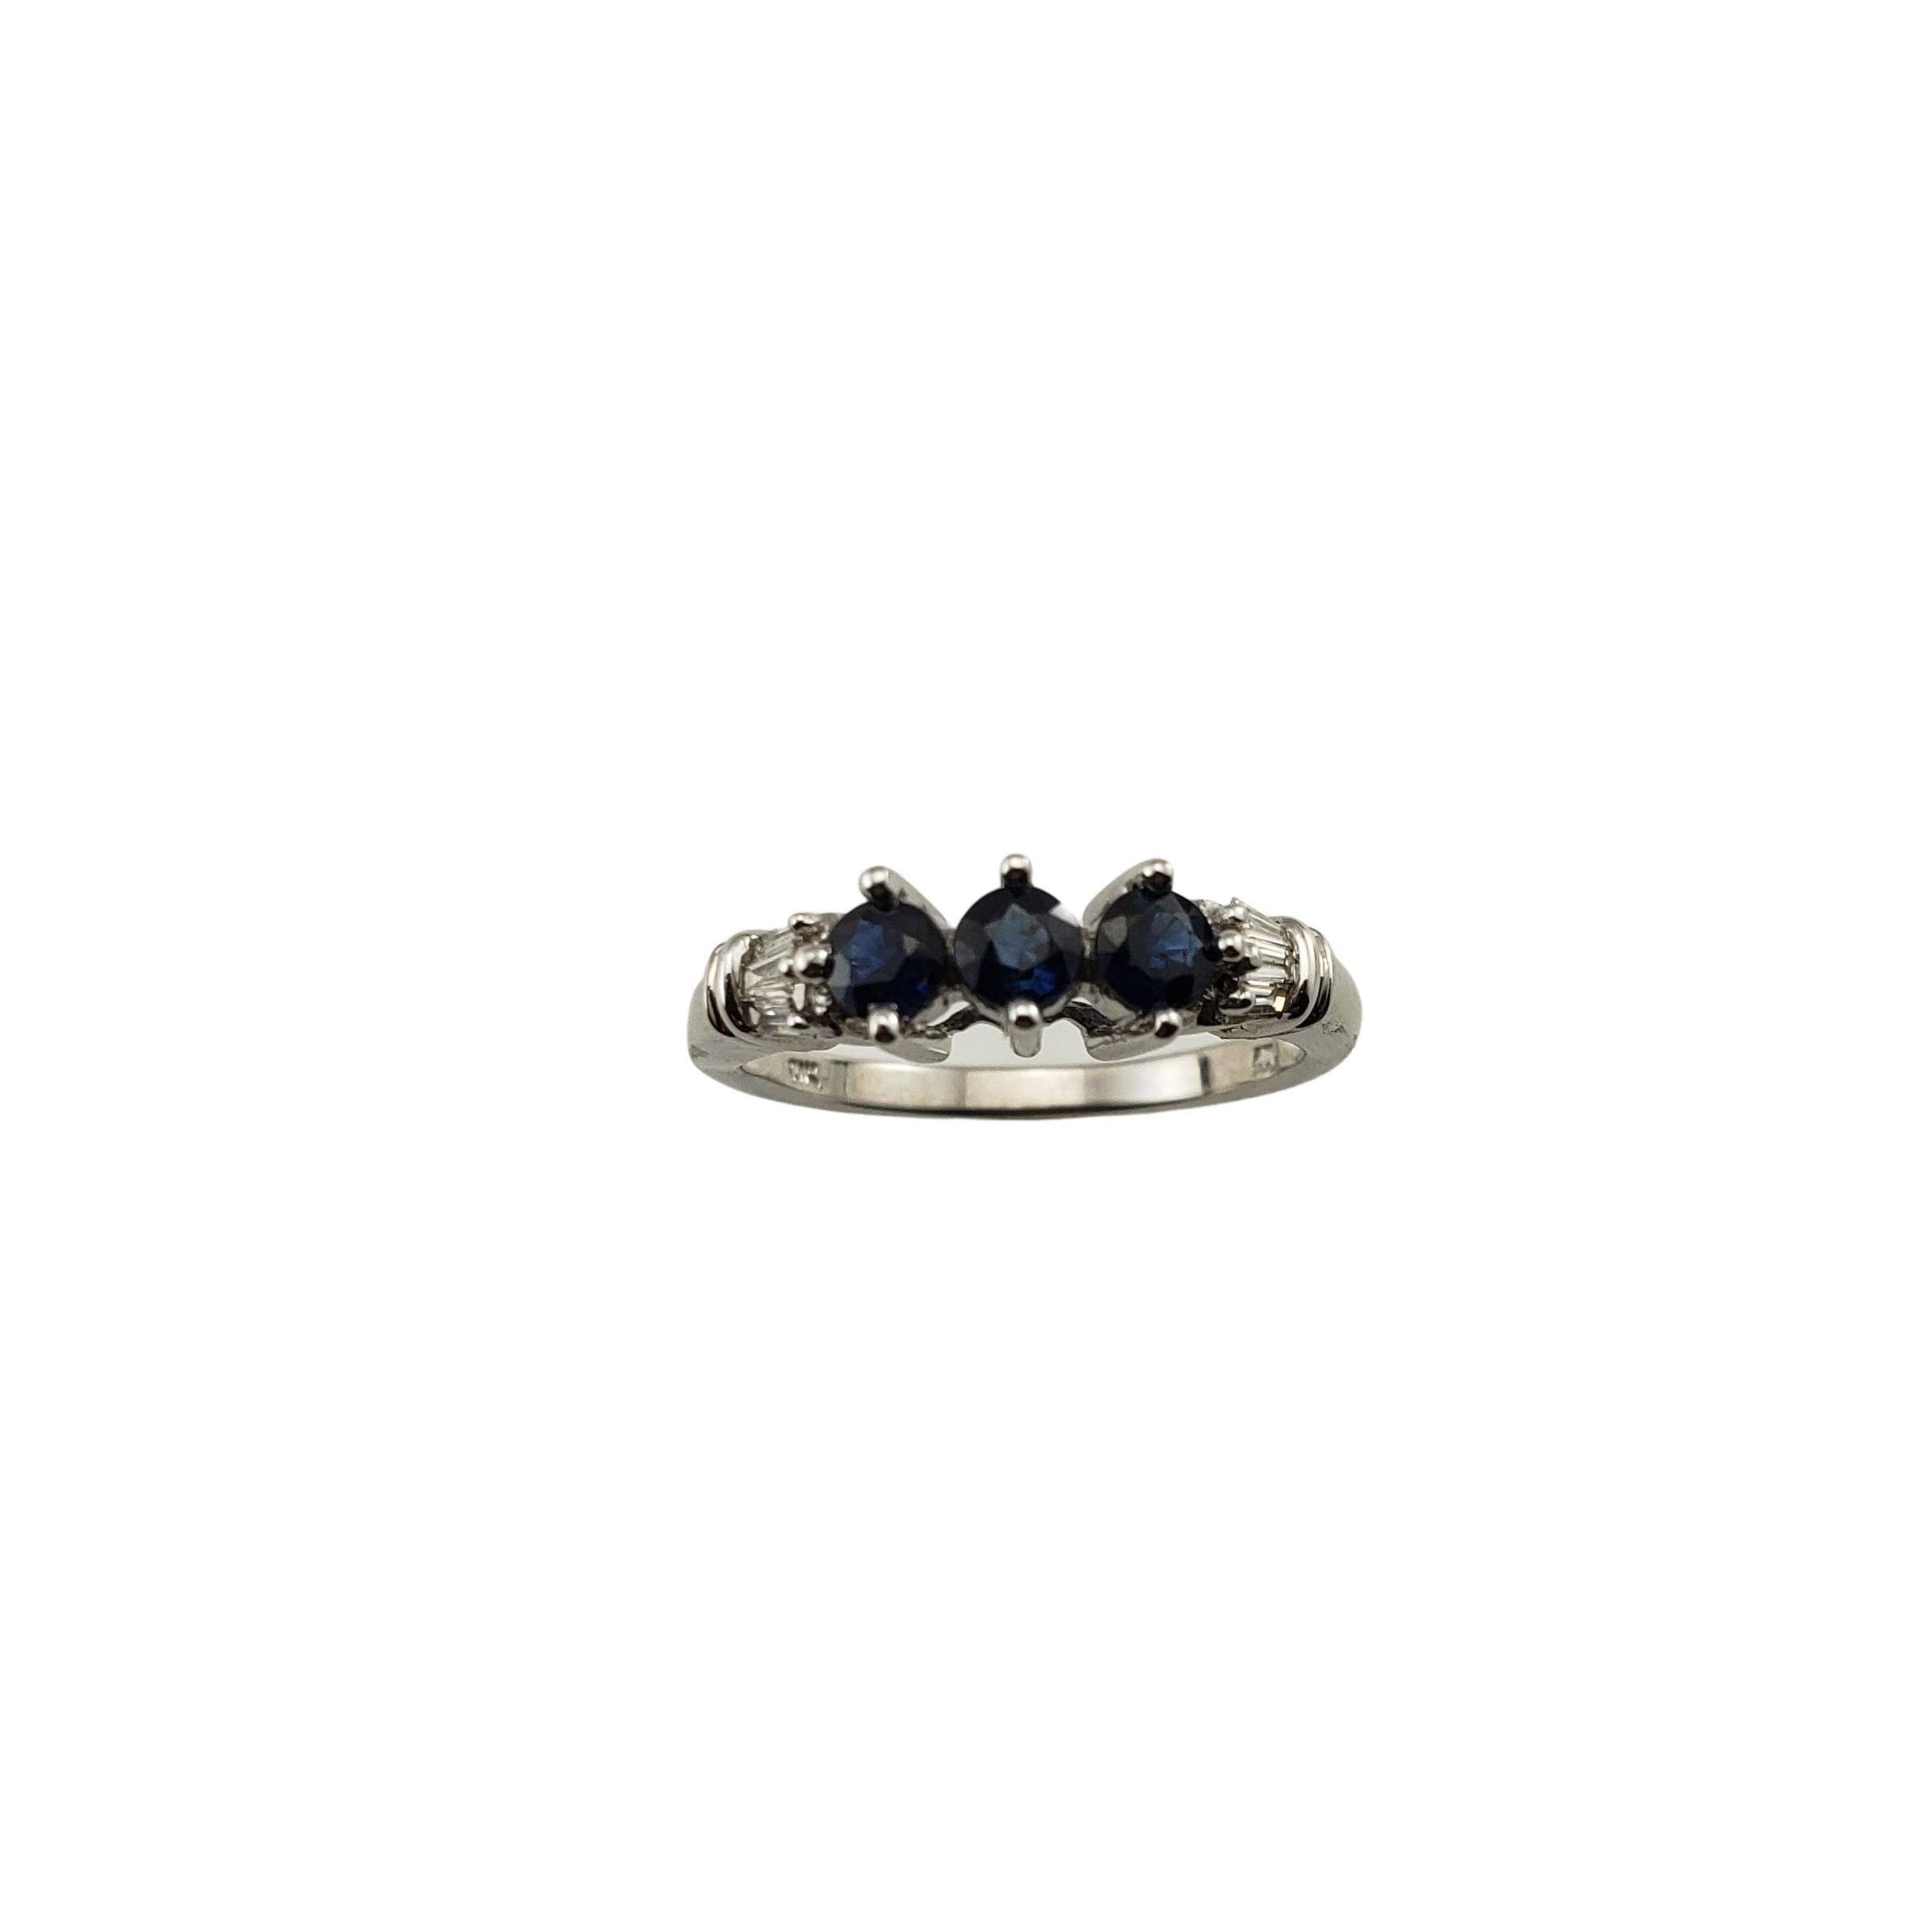 10 Karat White Gold Natural Sapphire and Diamond Ring Size 7-

This lovely ring features three round sapphires (4 mm each) and six baguette diamonds set in classic 10K white gold.
Width:  5 mm.  Shank: 2 mm.

Approximate total diamond weight:  .12